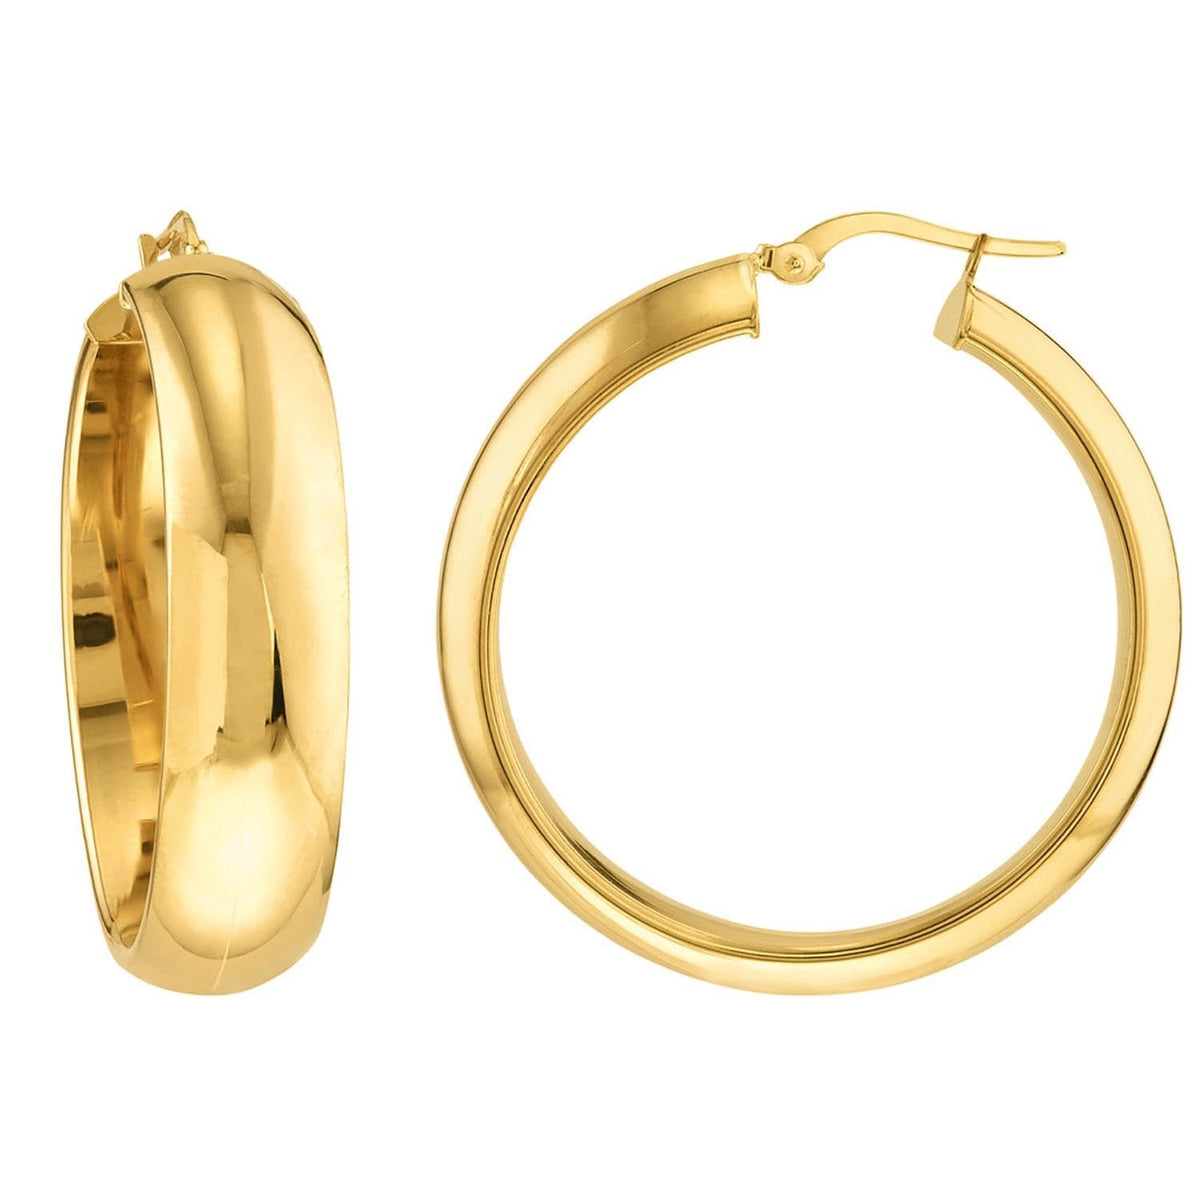 14k Yellow Gold Large Thick Flat Hoop Earrings with Latch Back, 30mm Height